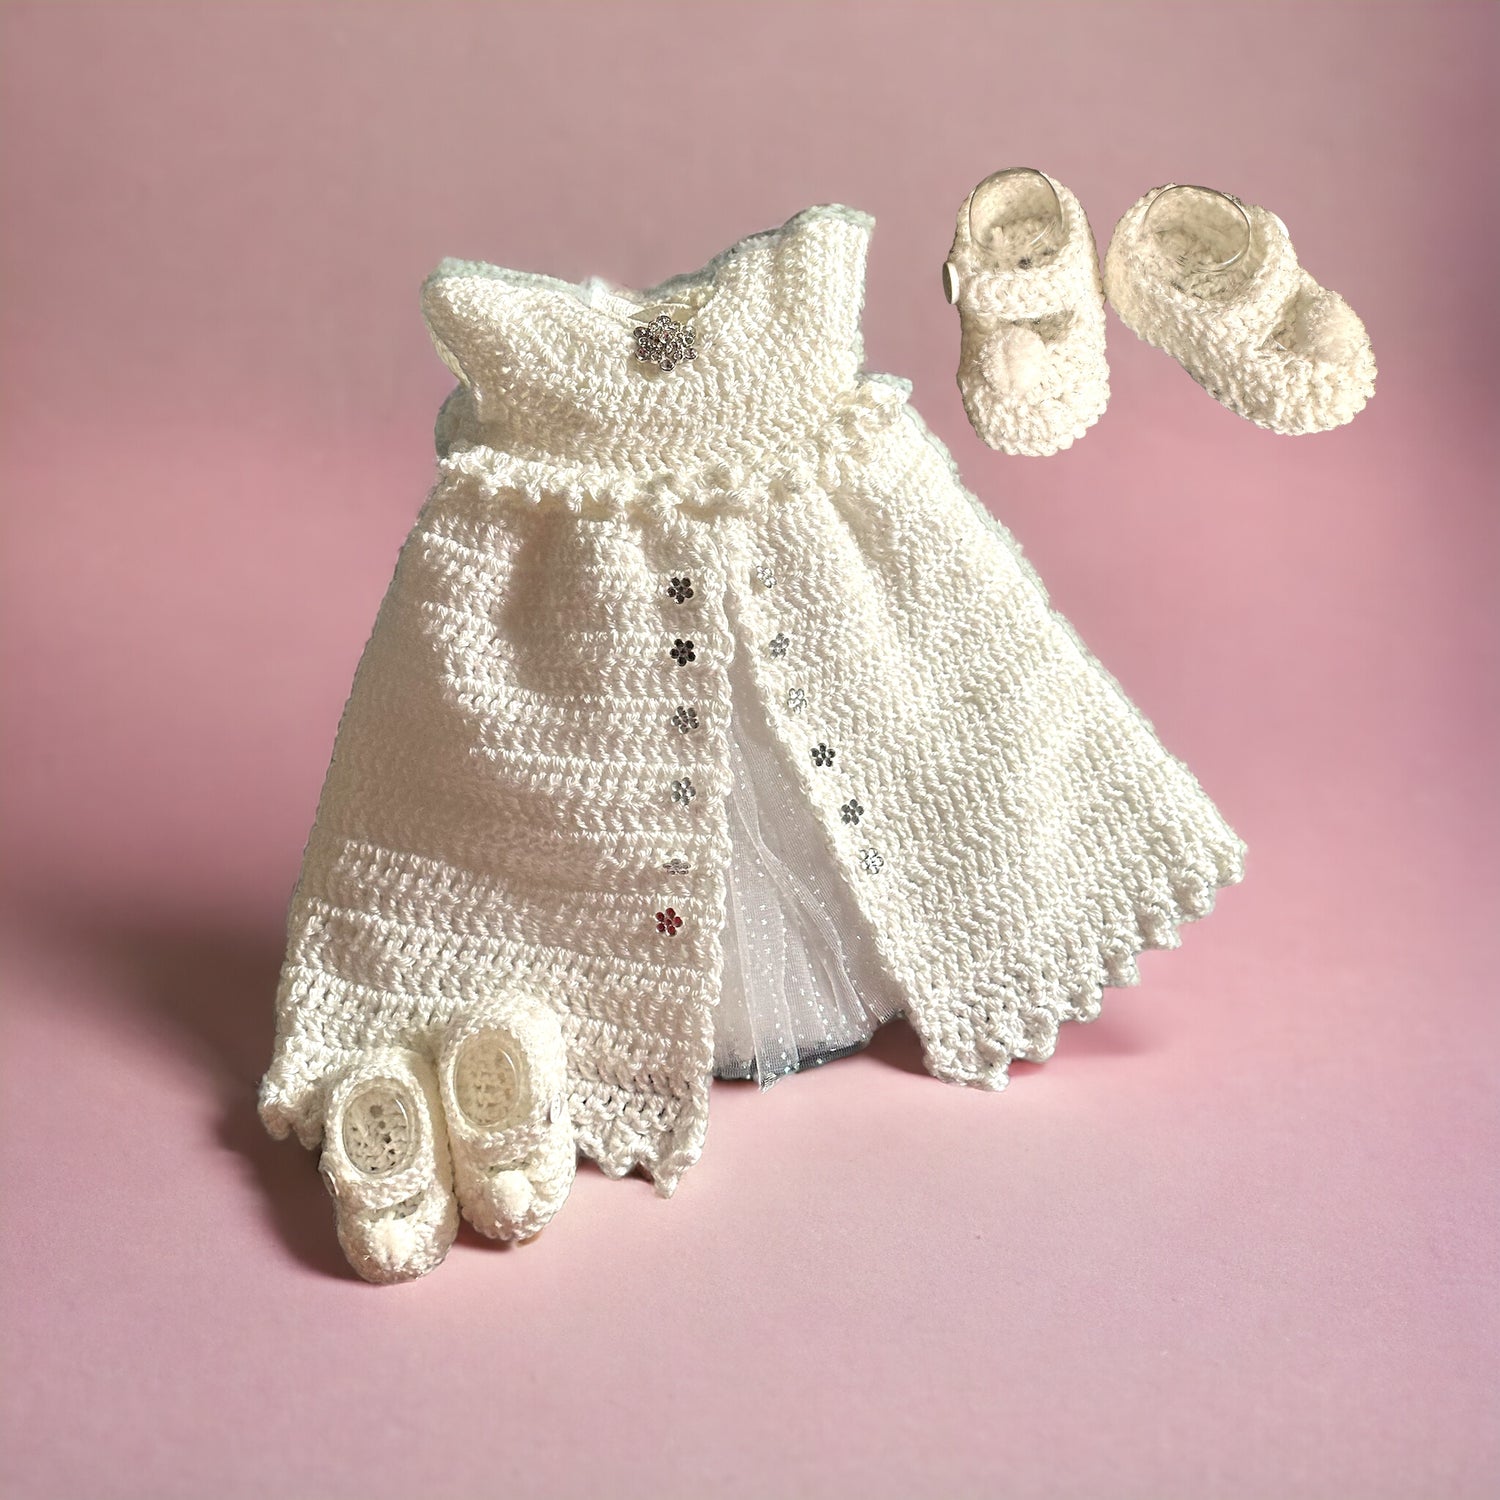 Heirloom Christening Gown and Mary Jane Style Booties